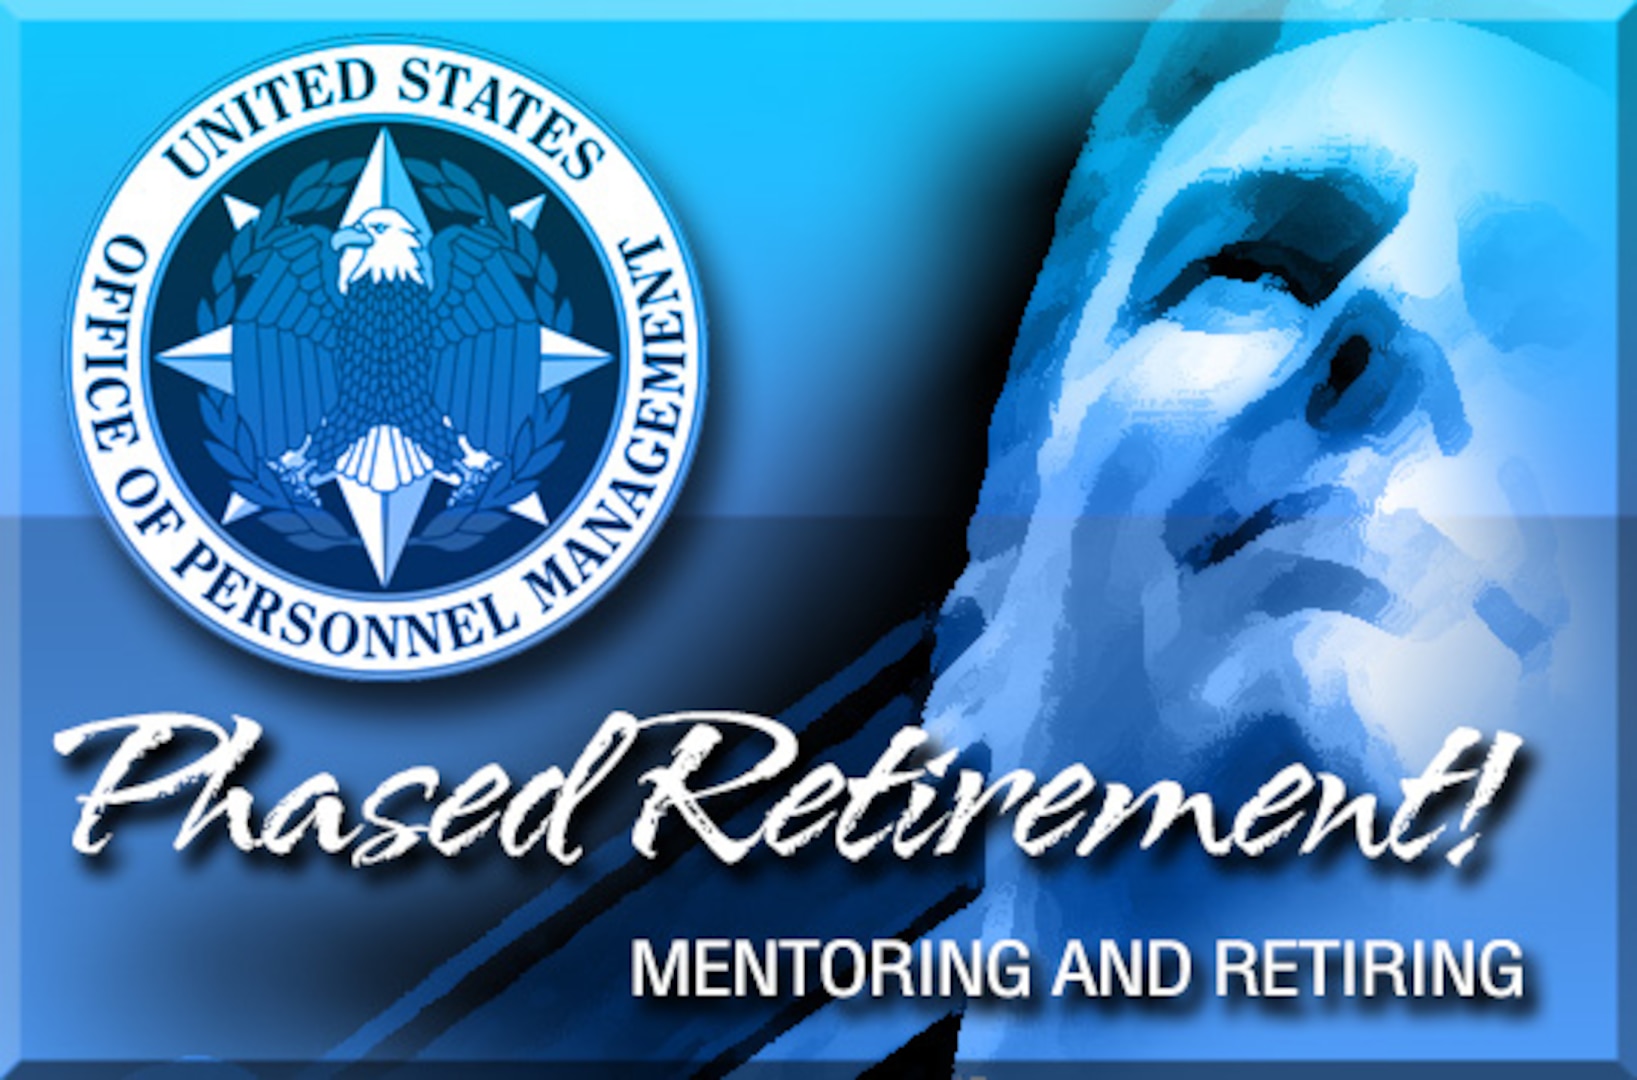 DLA is working on its final rules for phase retirement.